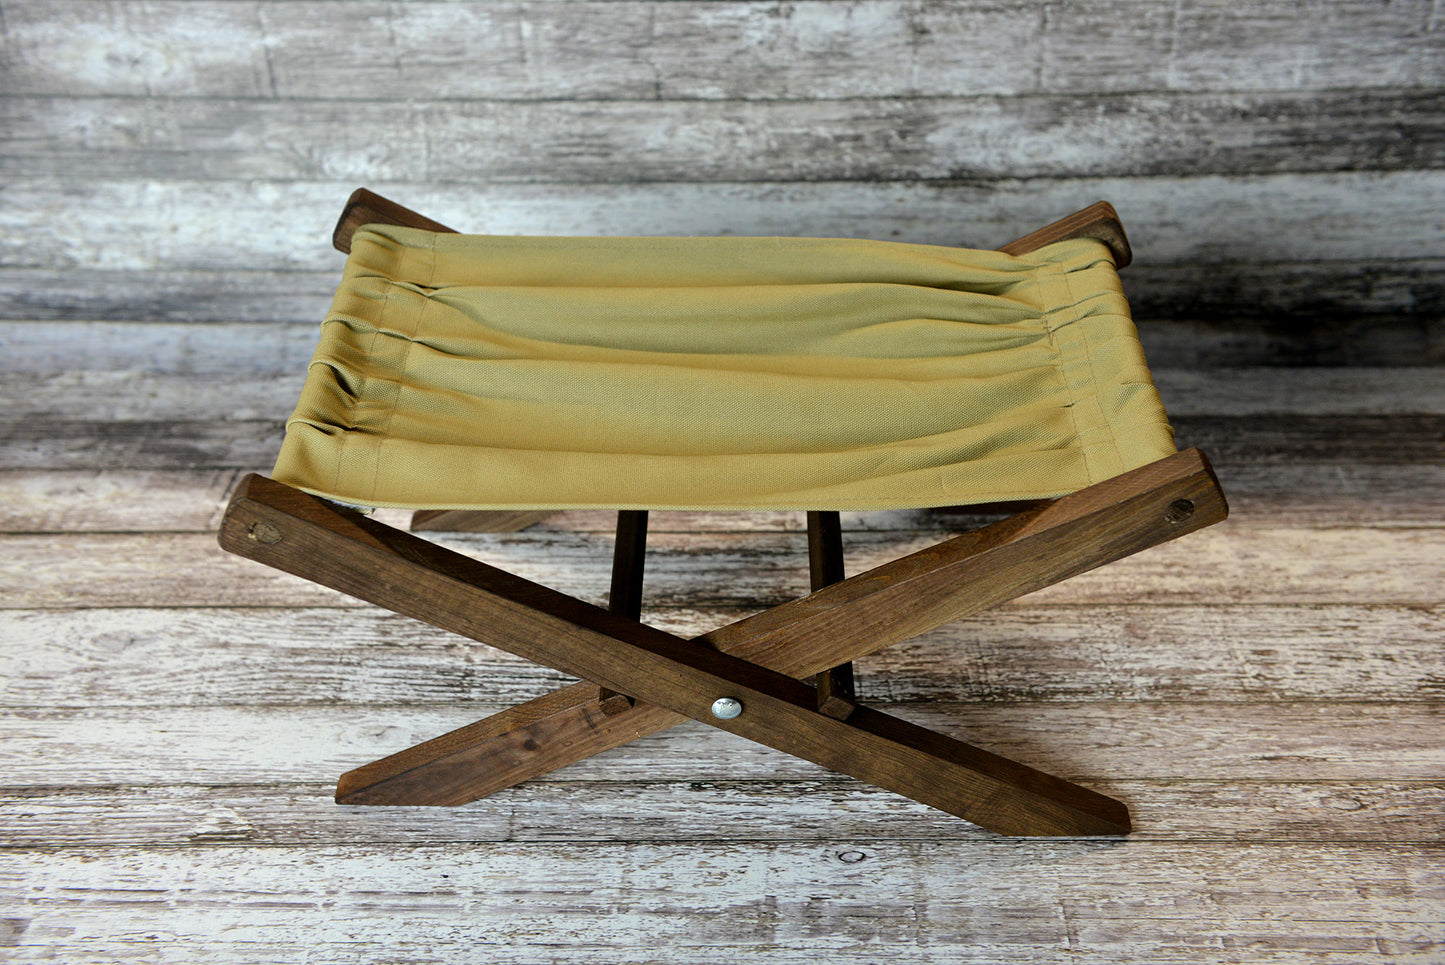 Rustic Deck Chair AND Matching Pillow - Khaki Canvas - Interchangeable-Newborn Photography Props